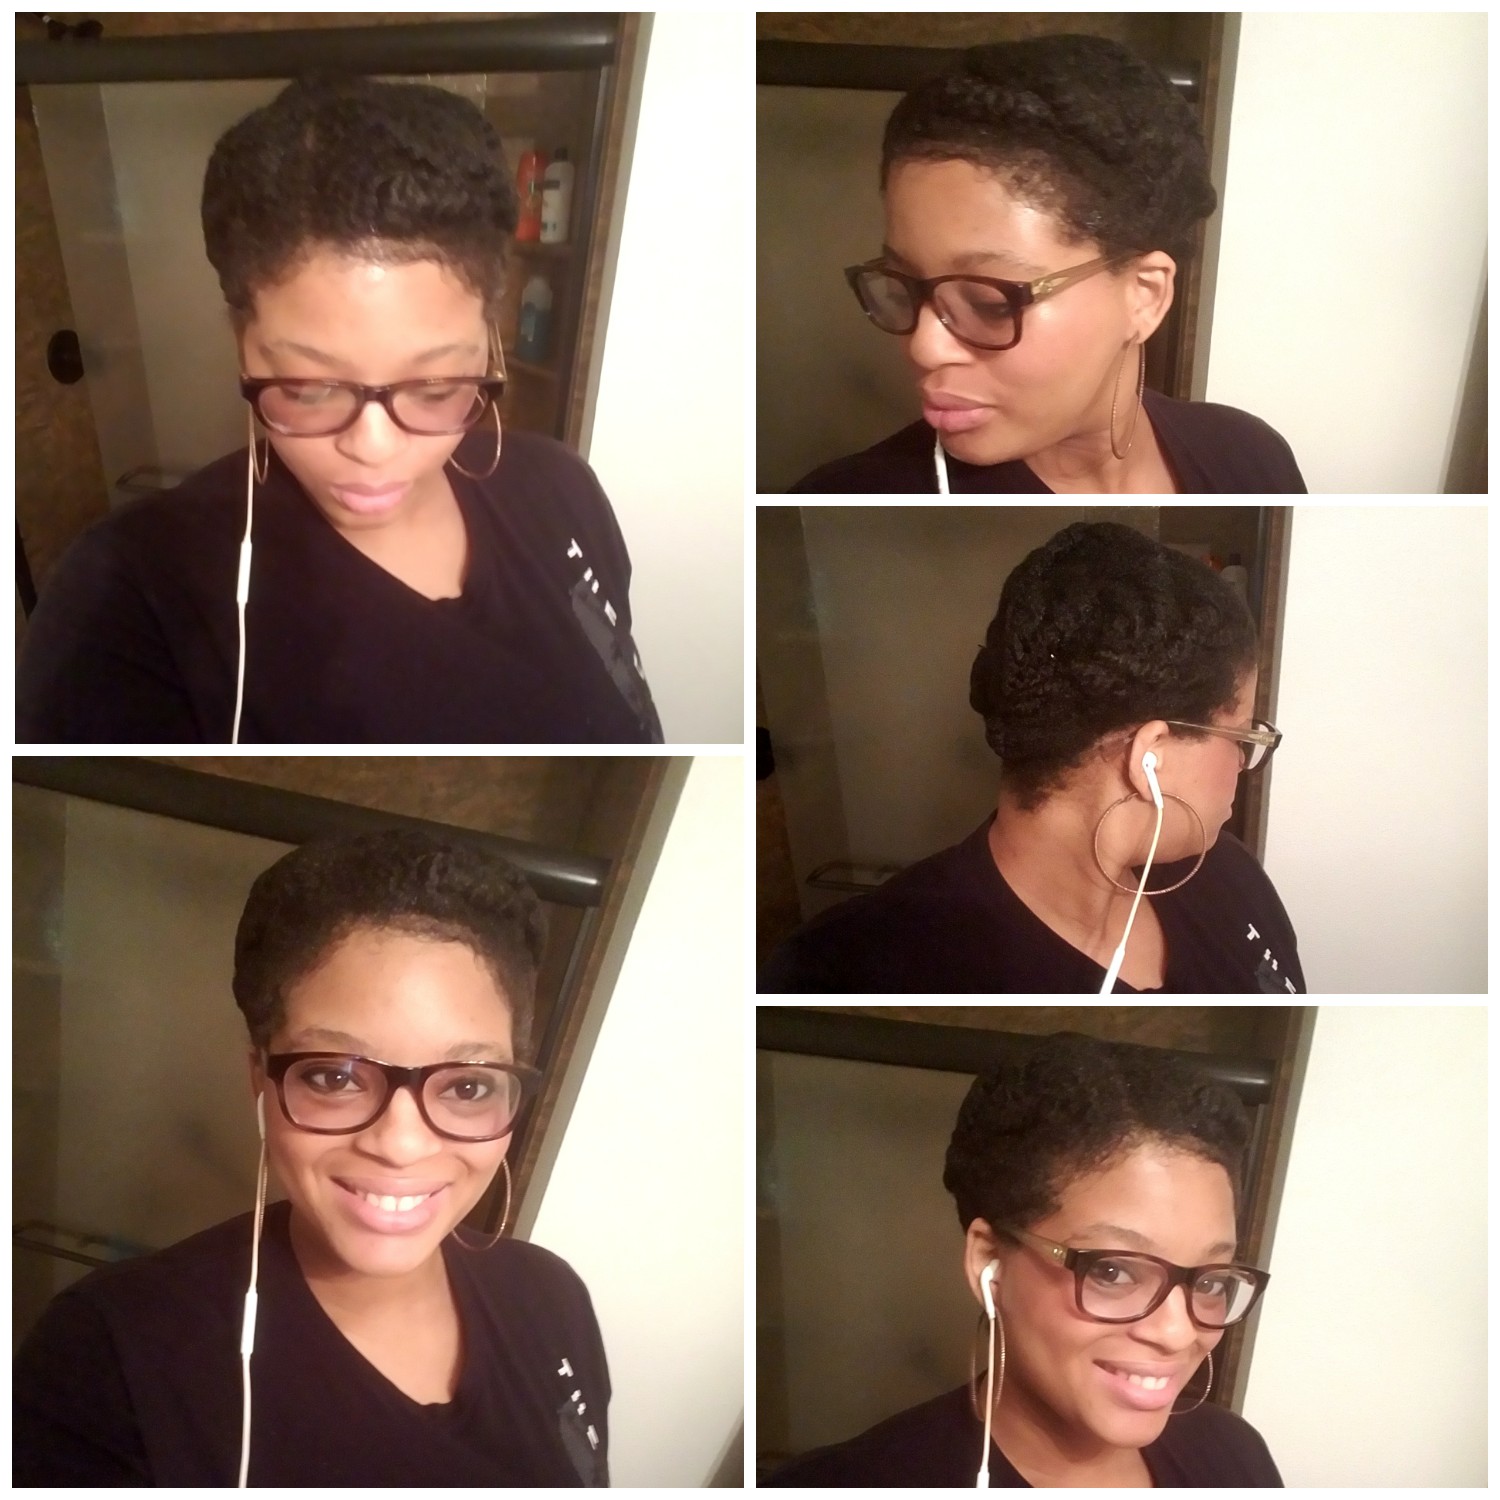 Songbirds Crochet Too!: Yay For Low Manipulative Protective Hair Styles!!!